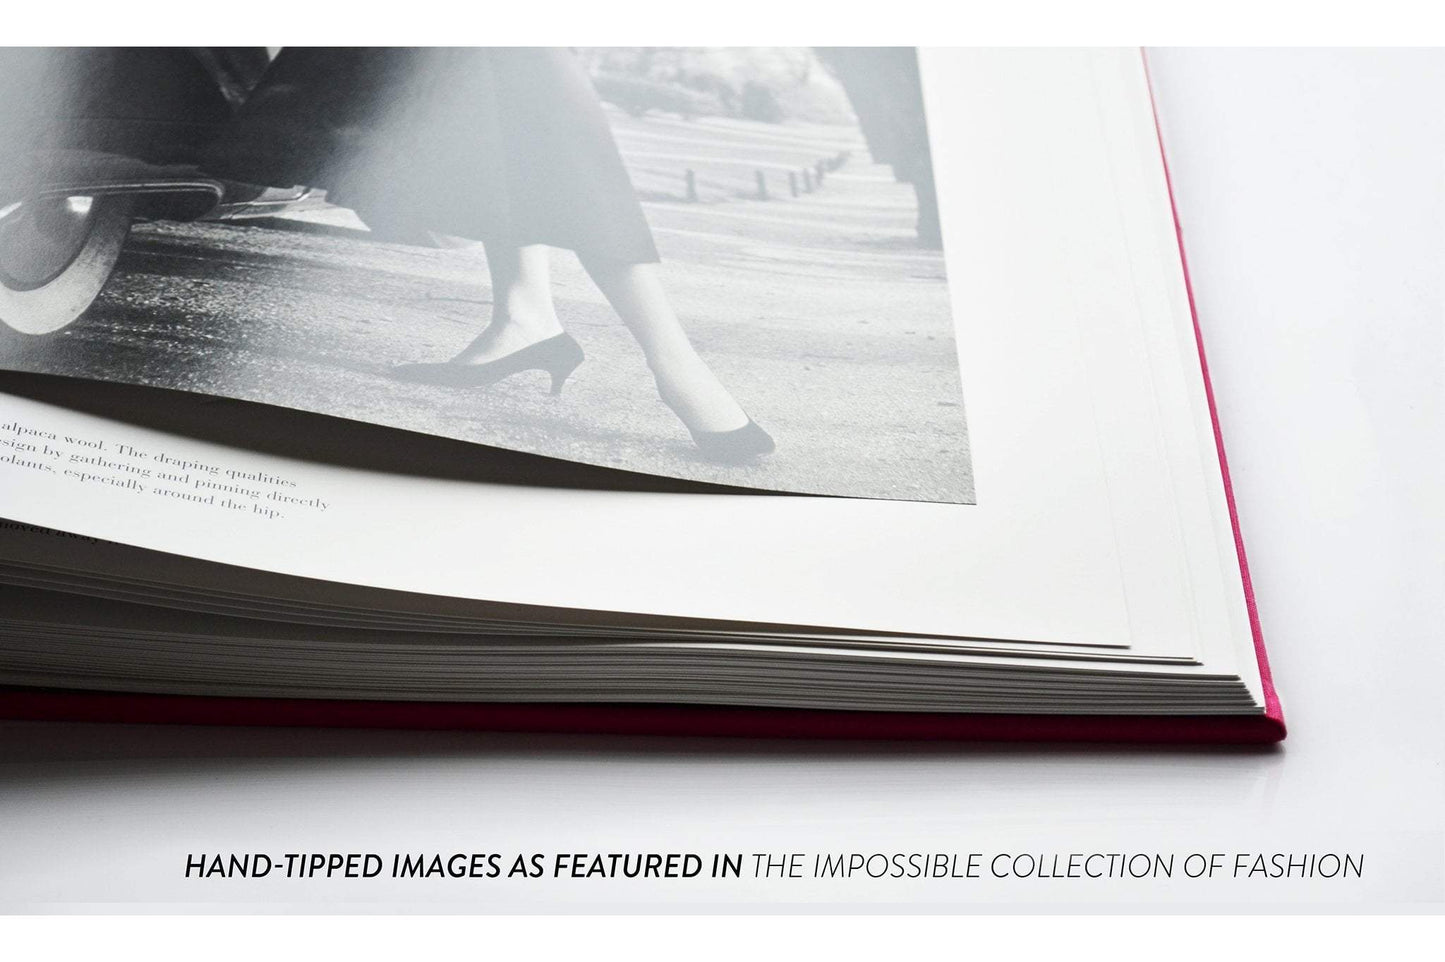 Livre The Impossible Collection of Design